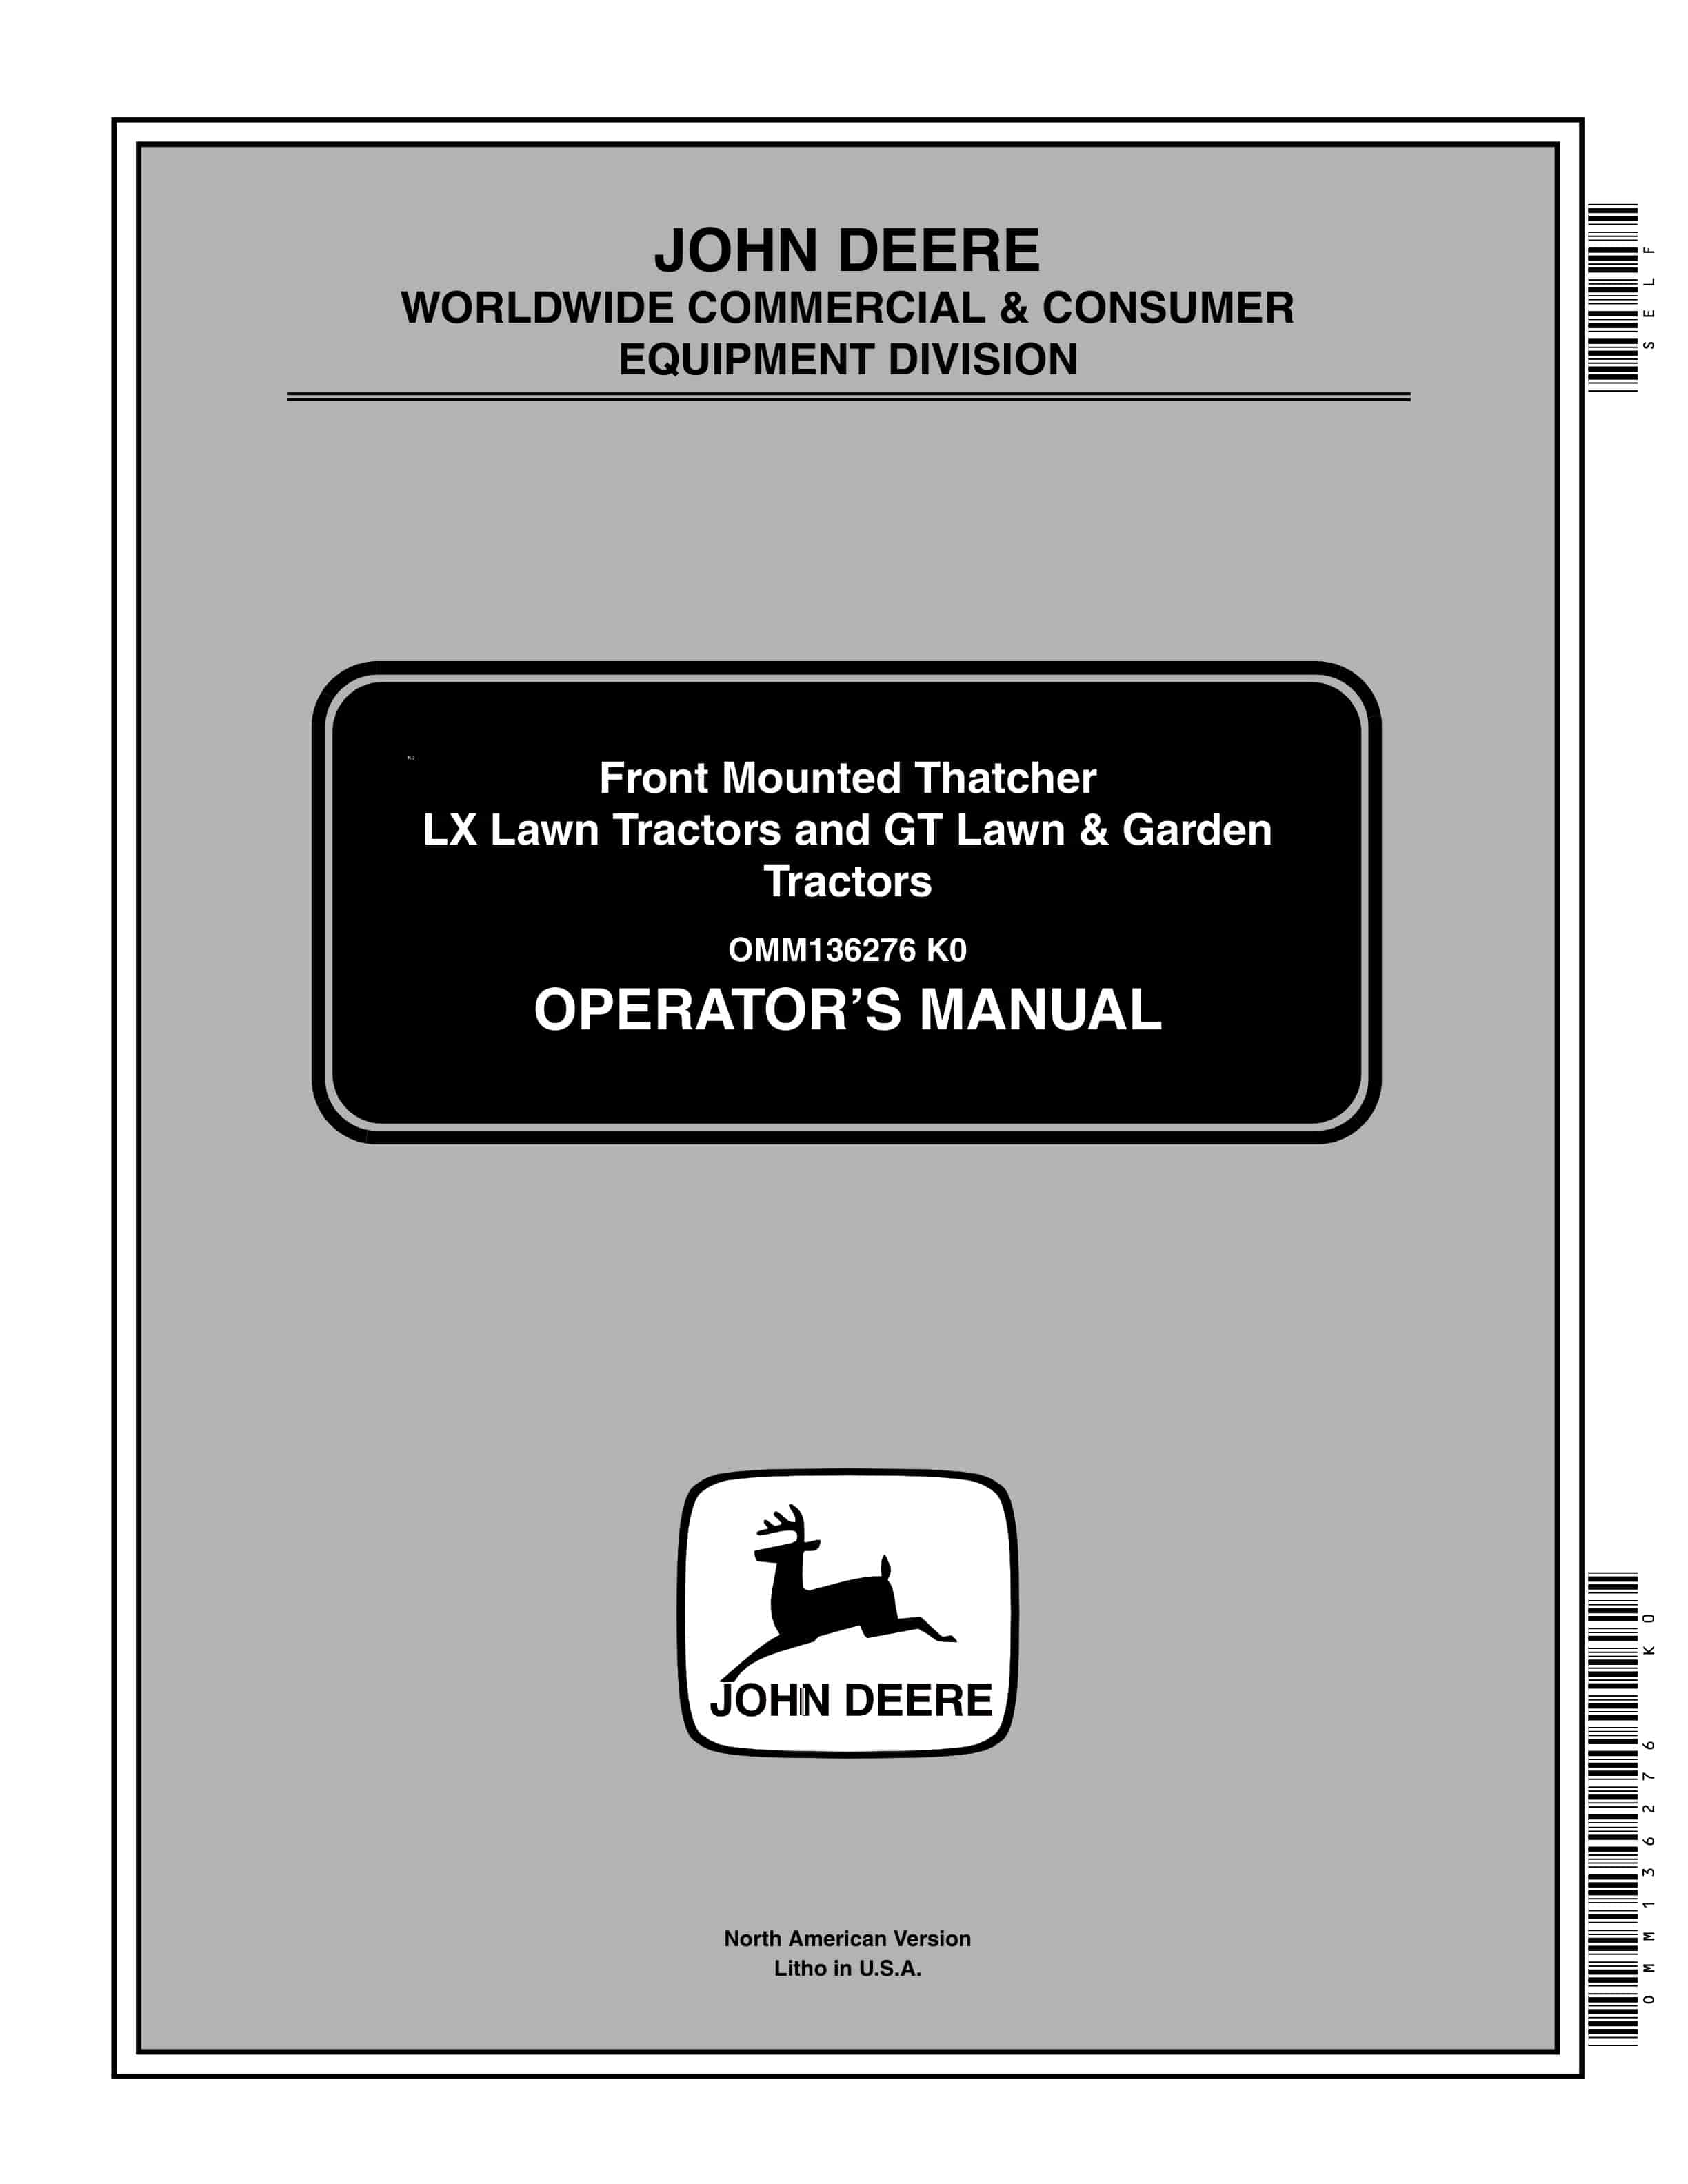 John Deere Front Mounted Thatcher LX Lawn Tractors and GT Lawn and Garden Tractors Operator Manual OMM136276 1